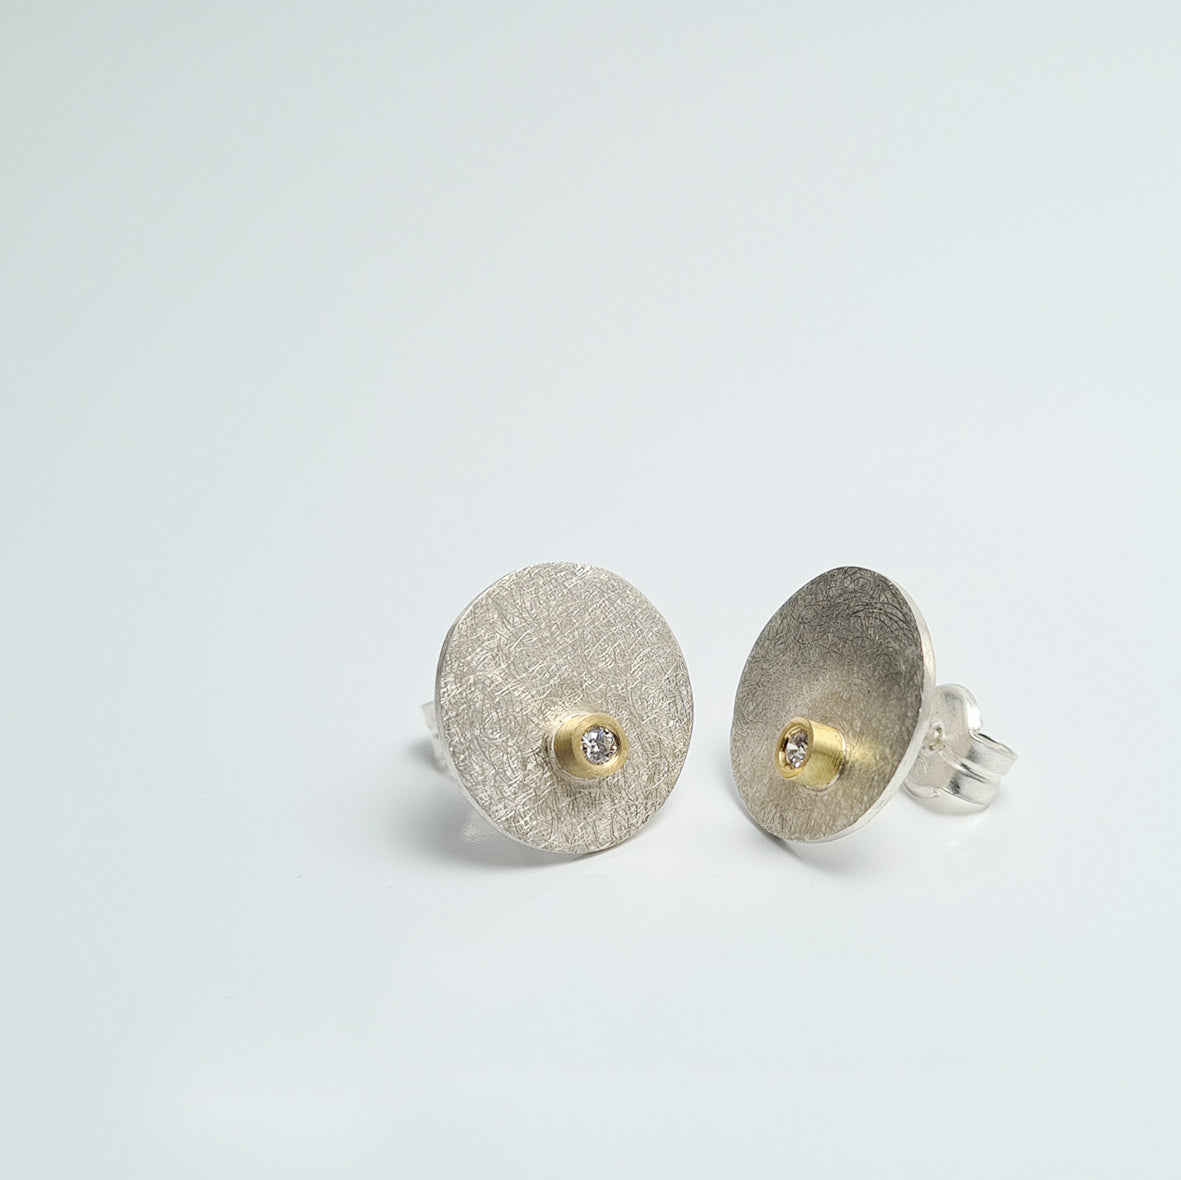 Earrings from the ooh collection